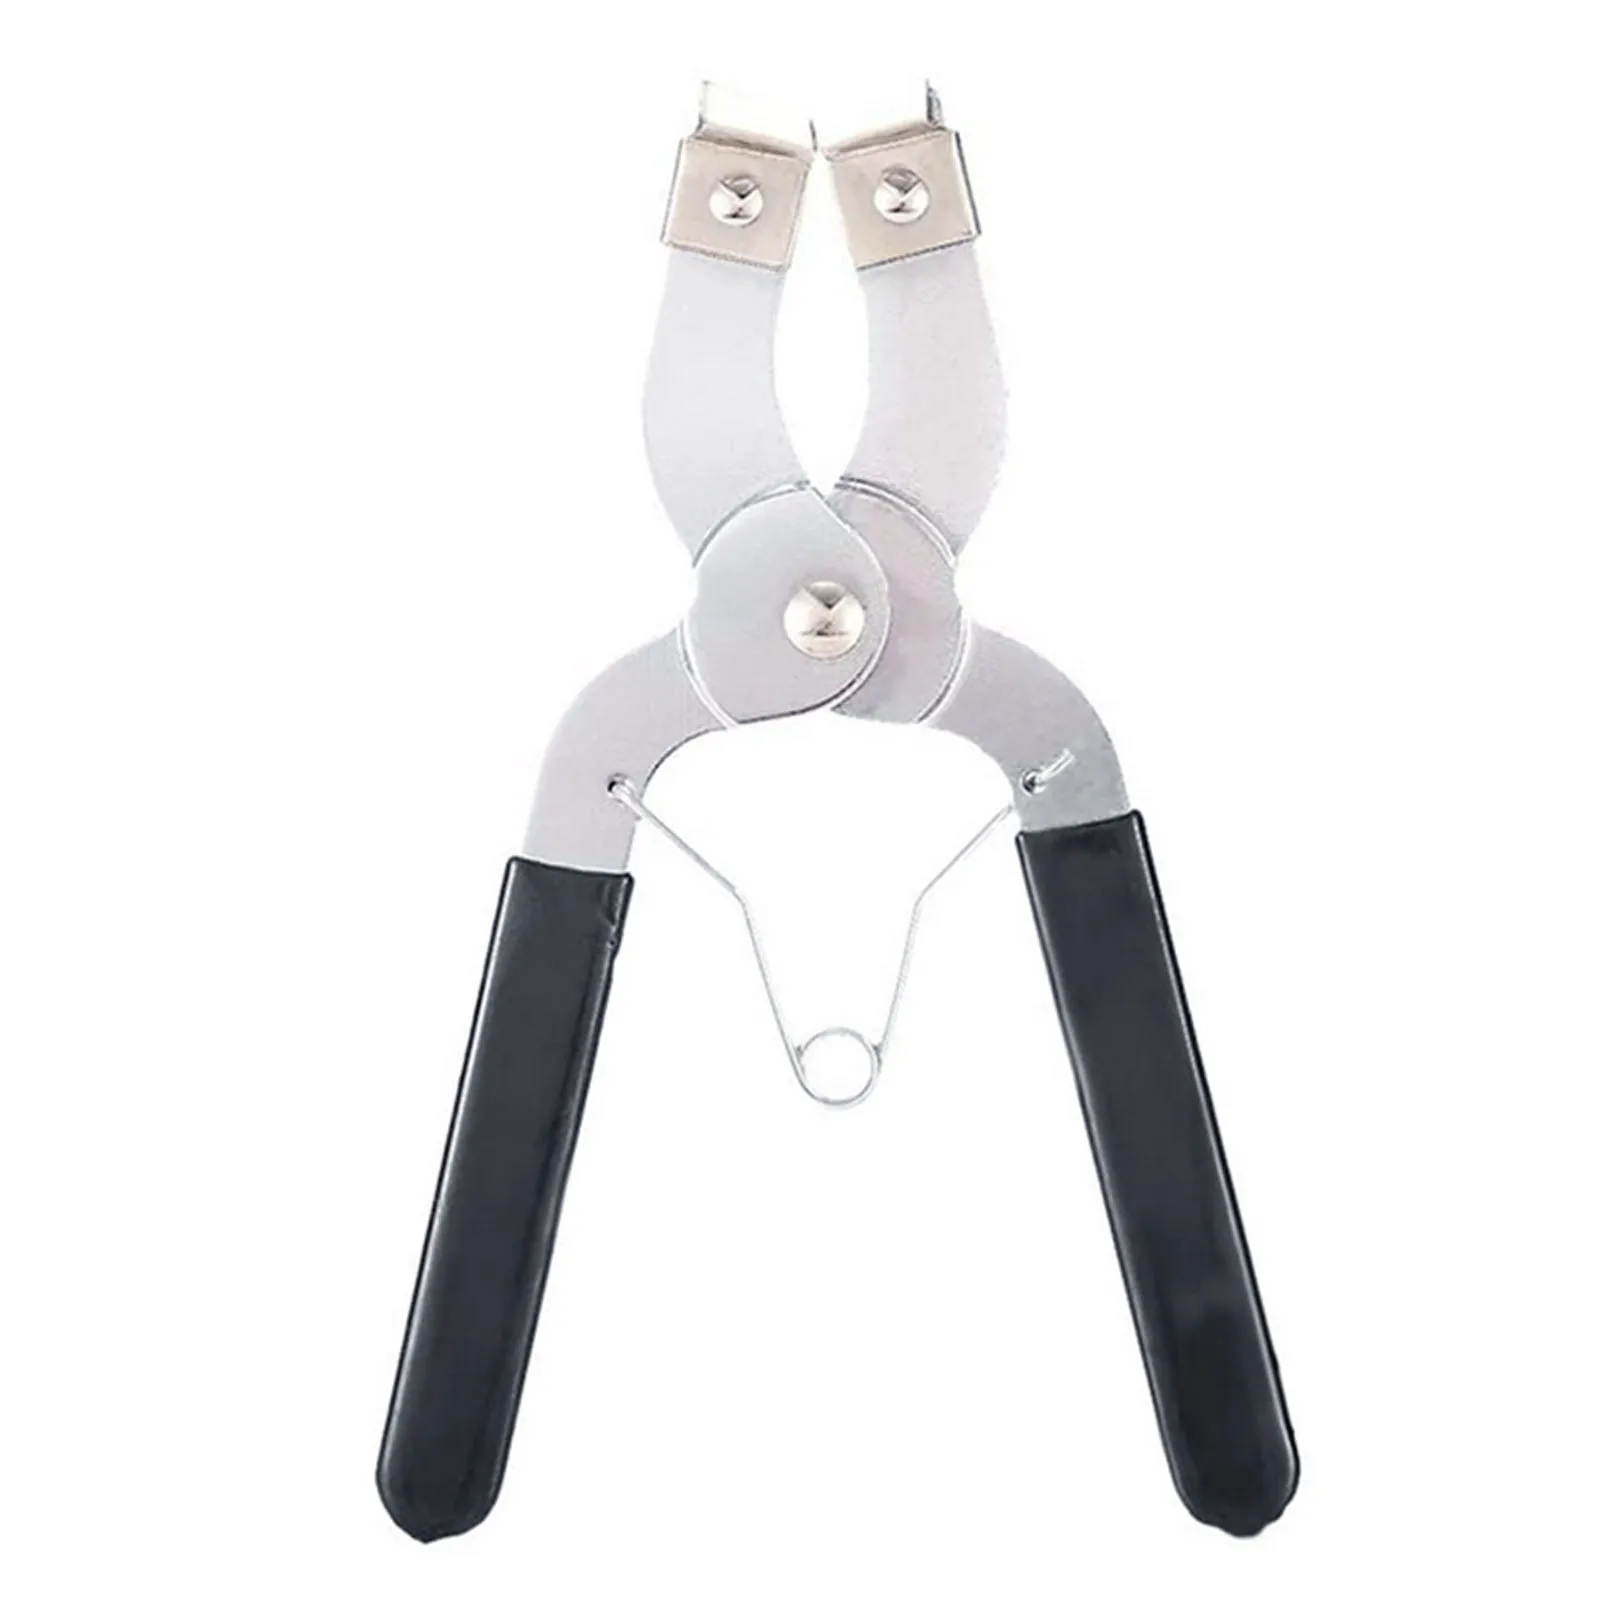 

Brake Piston Removal Pliers Universal Brake Piston Puller Simple Car Piston Ring Disassembly And Assembly Expander